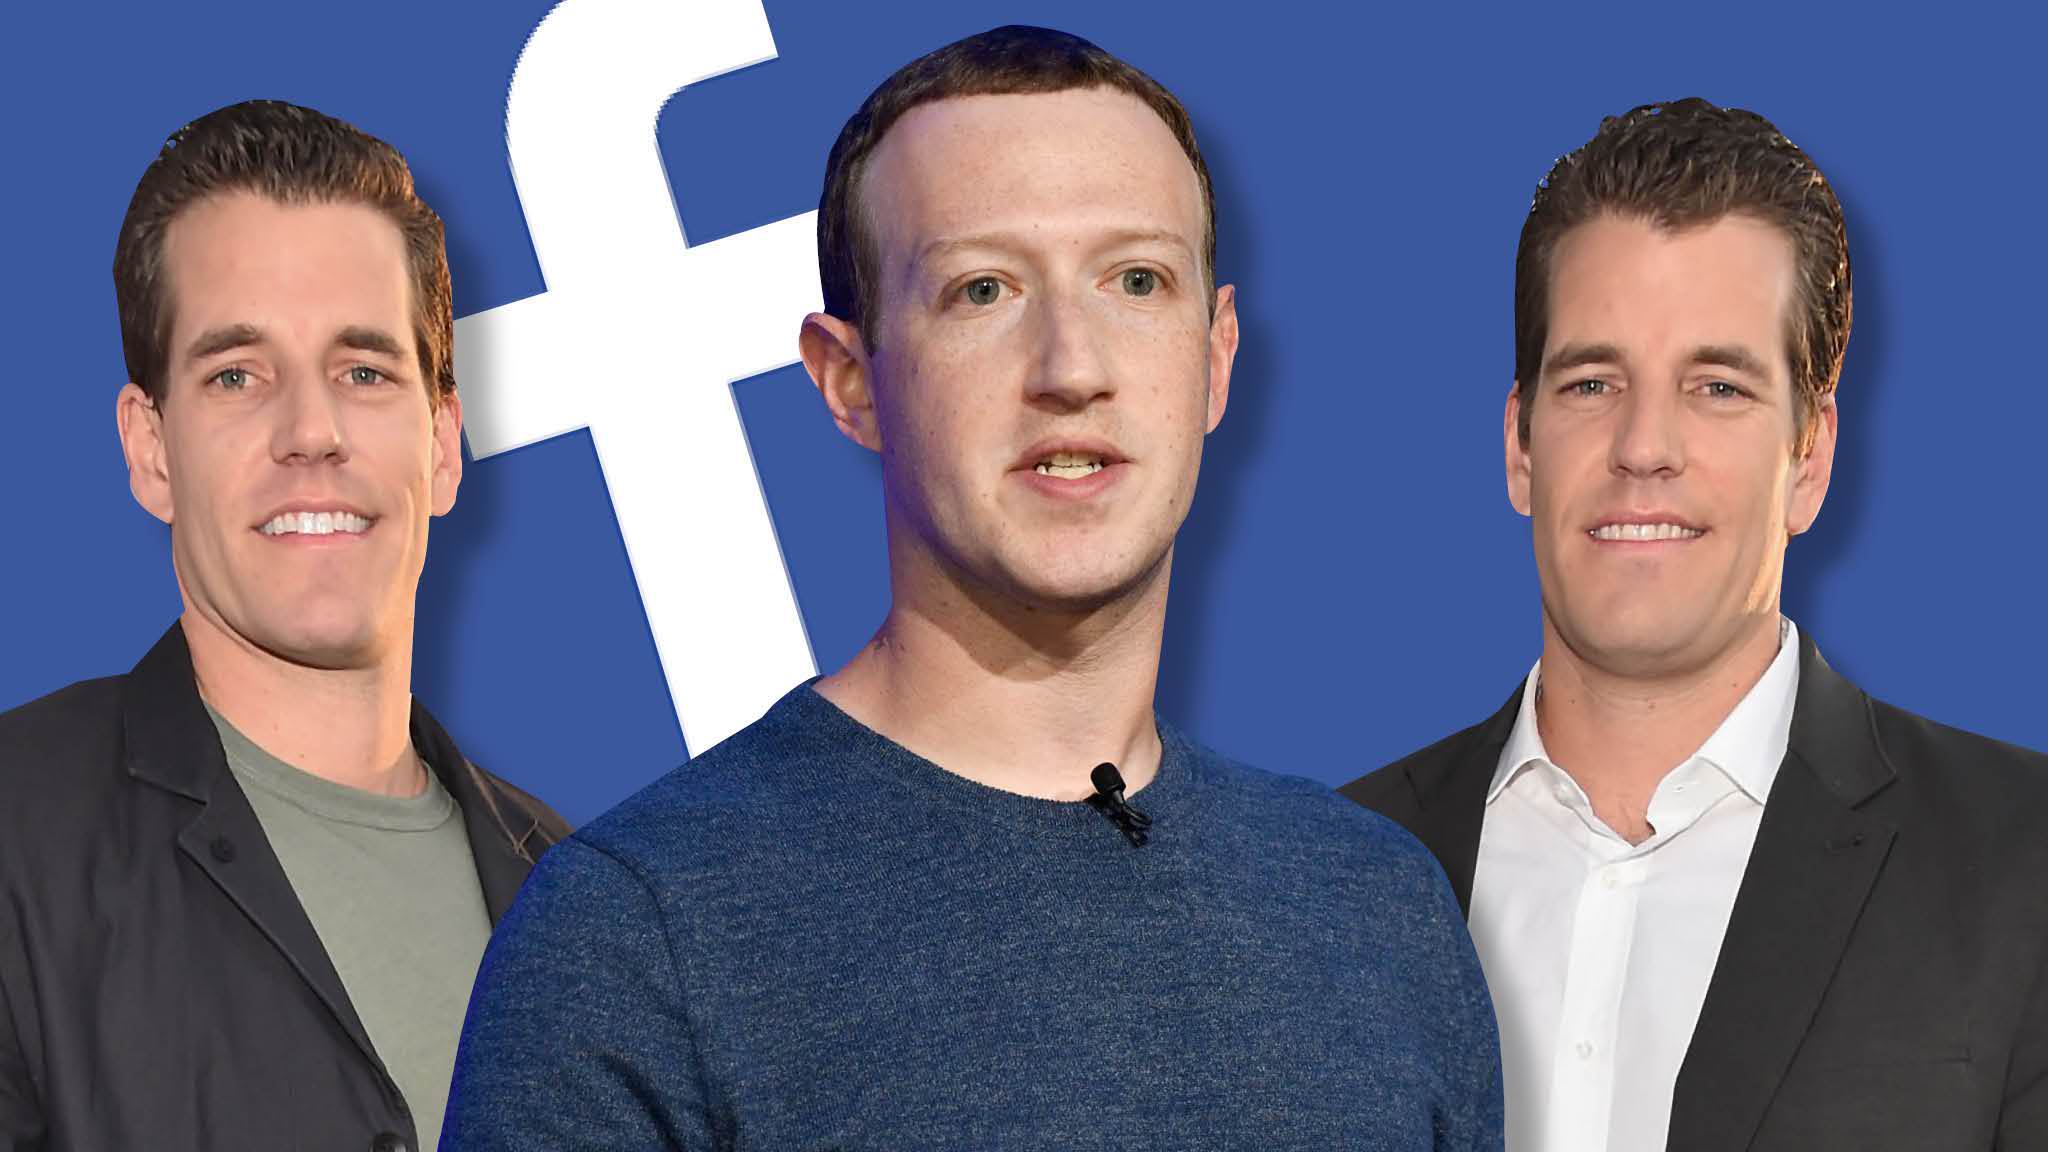 The Social Network follows the origin of Facebook that ended with The Winklevoss Twins suing Mark Zuckerberg